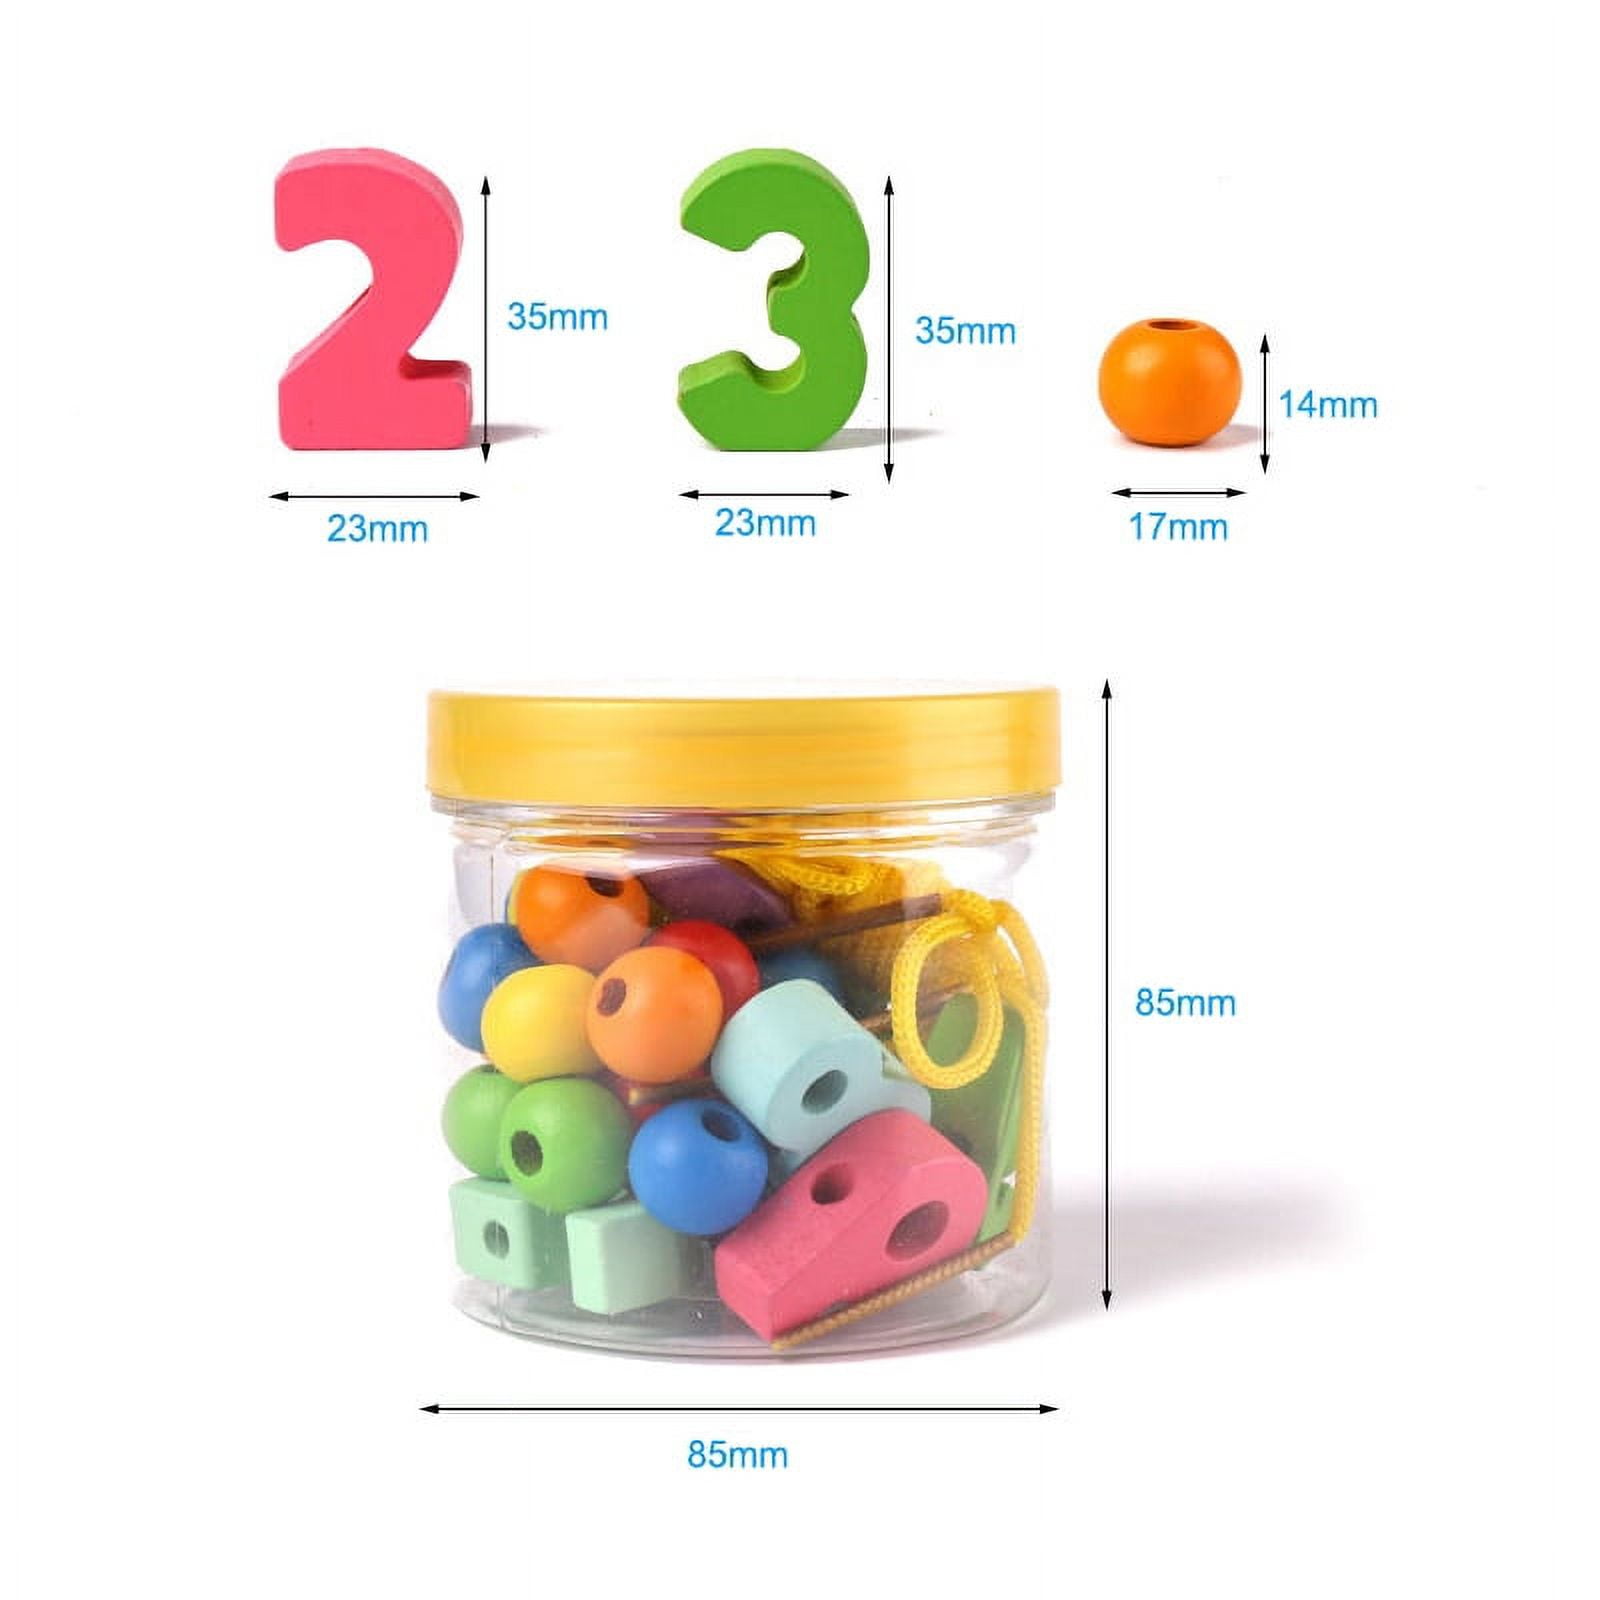 Lena 32051 Craft Set Wooden Letter Beads, 300 Round Threading Beads and  Colourful Letters, Wooden Beads Set for Children from 3 Years, for DIY  Beads